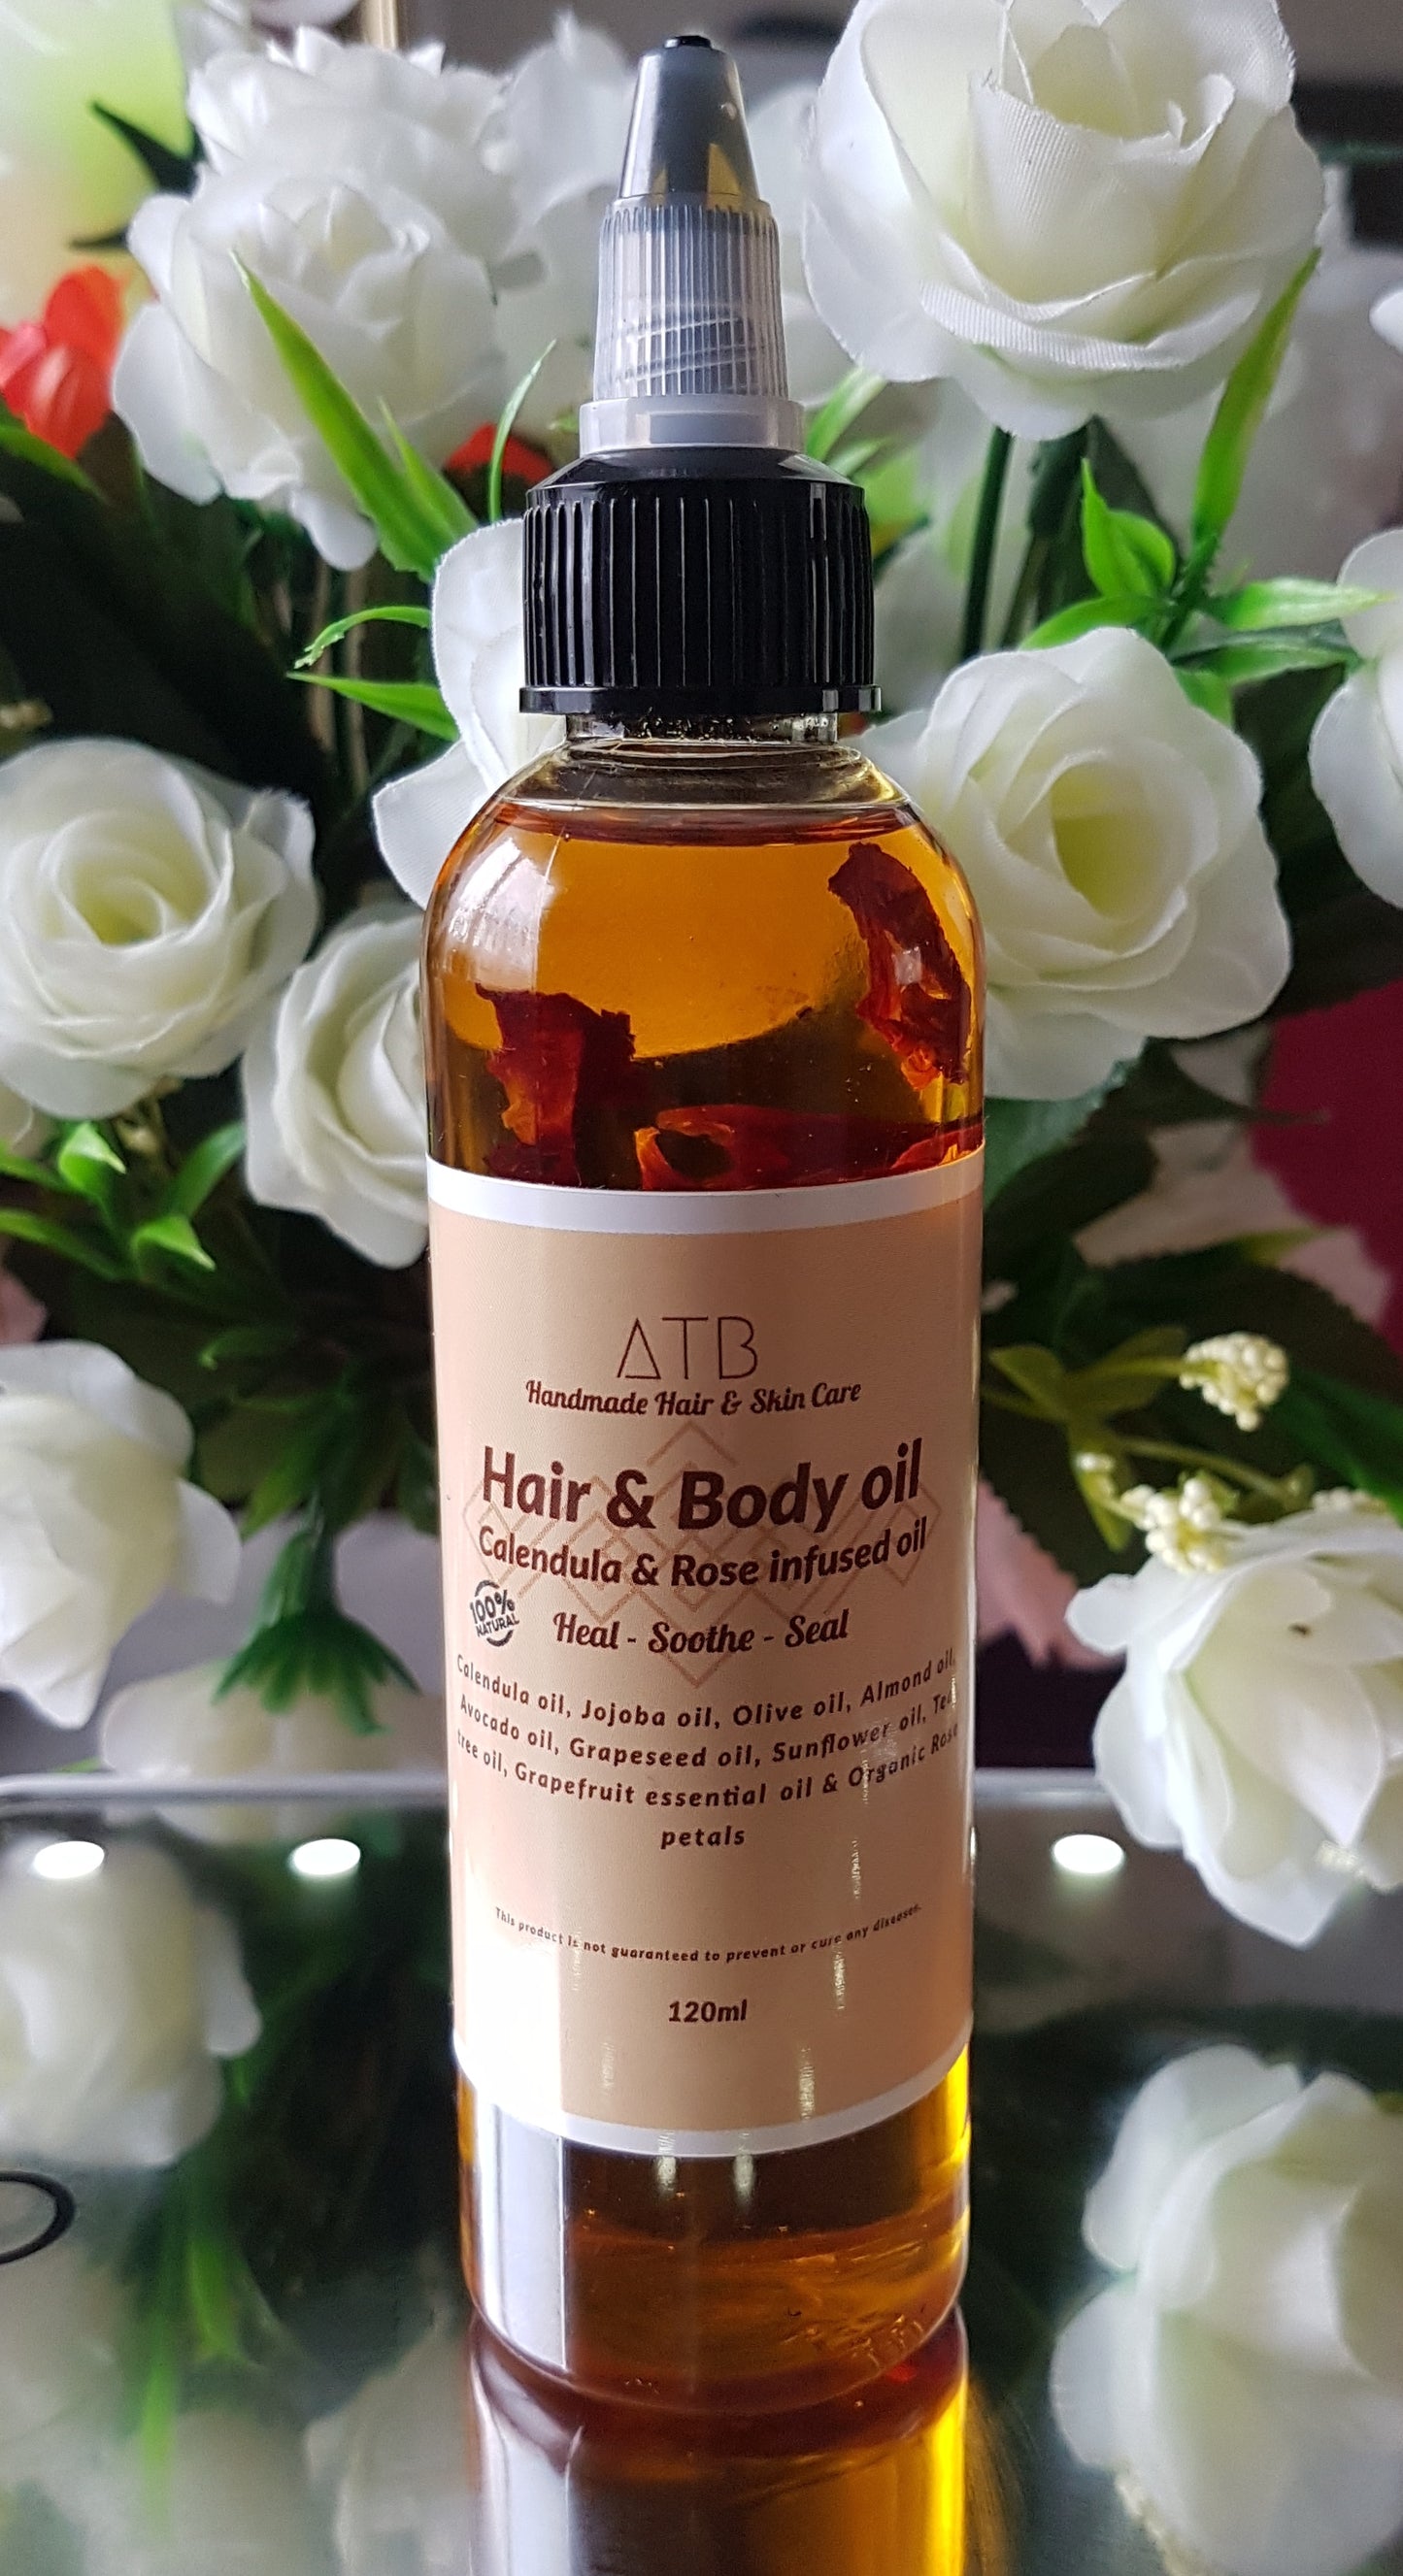 ATB Calendula and Rose petals infused oil for hair & body